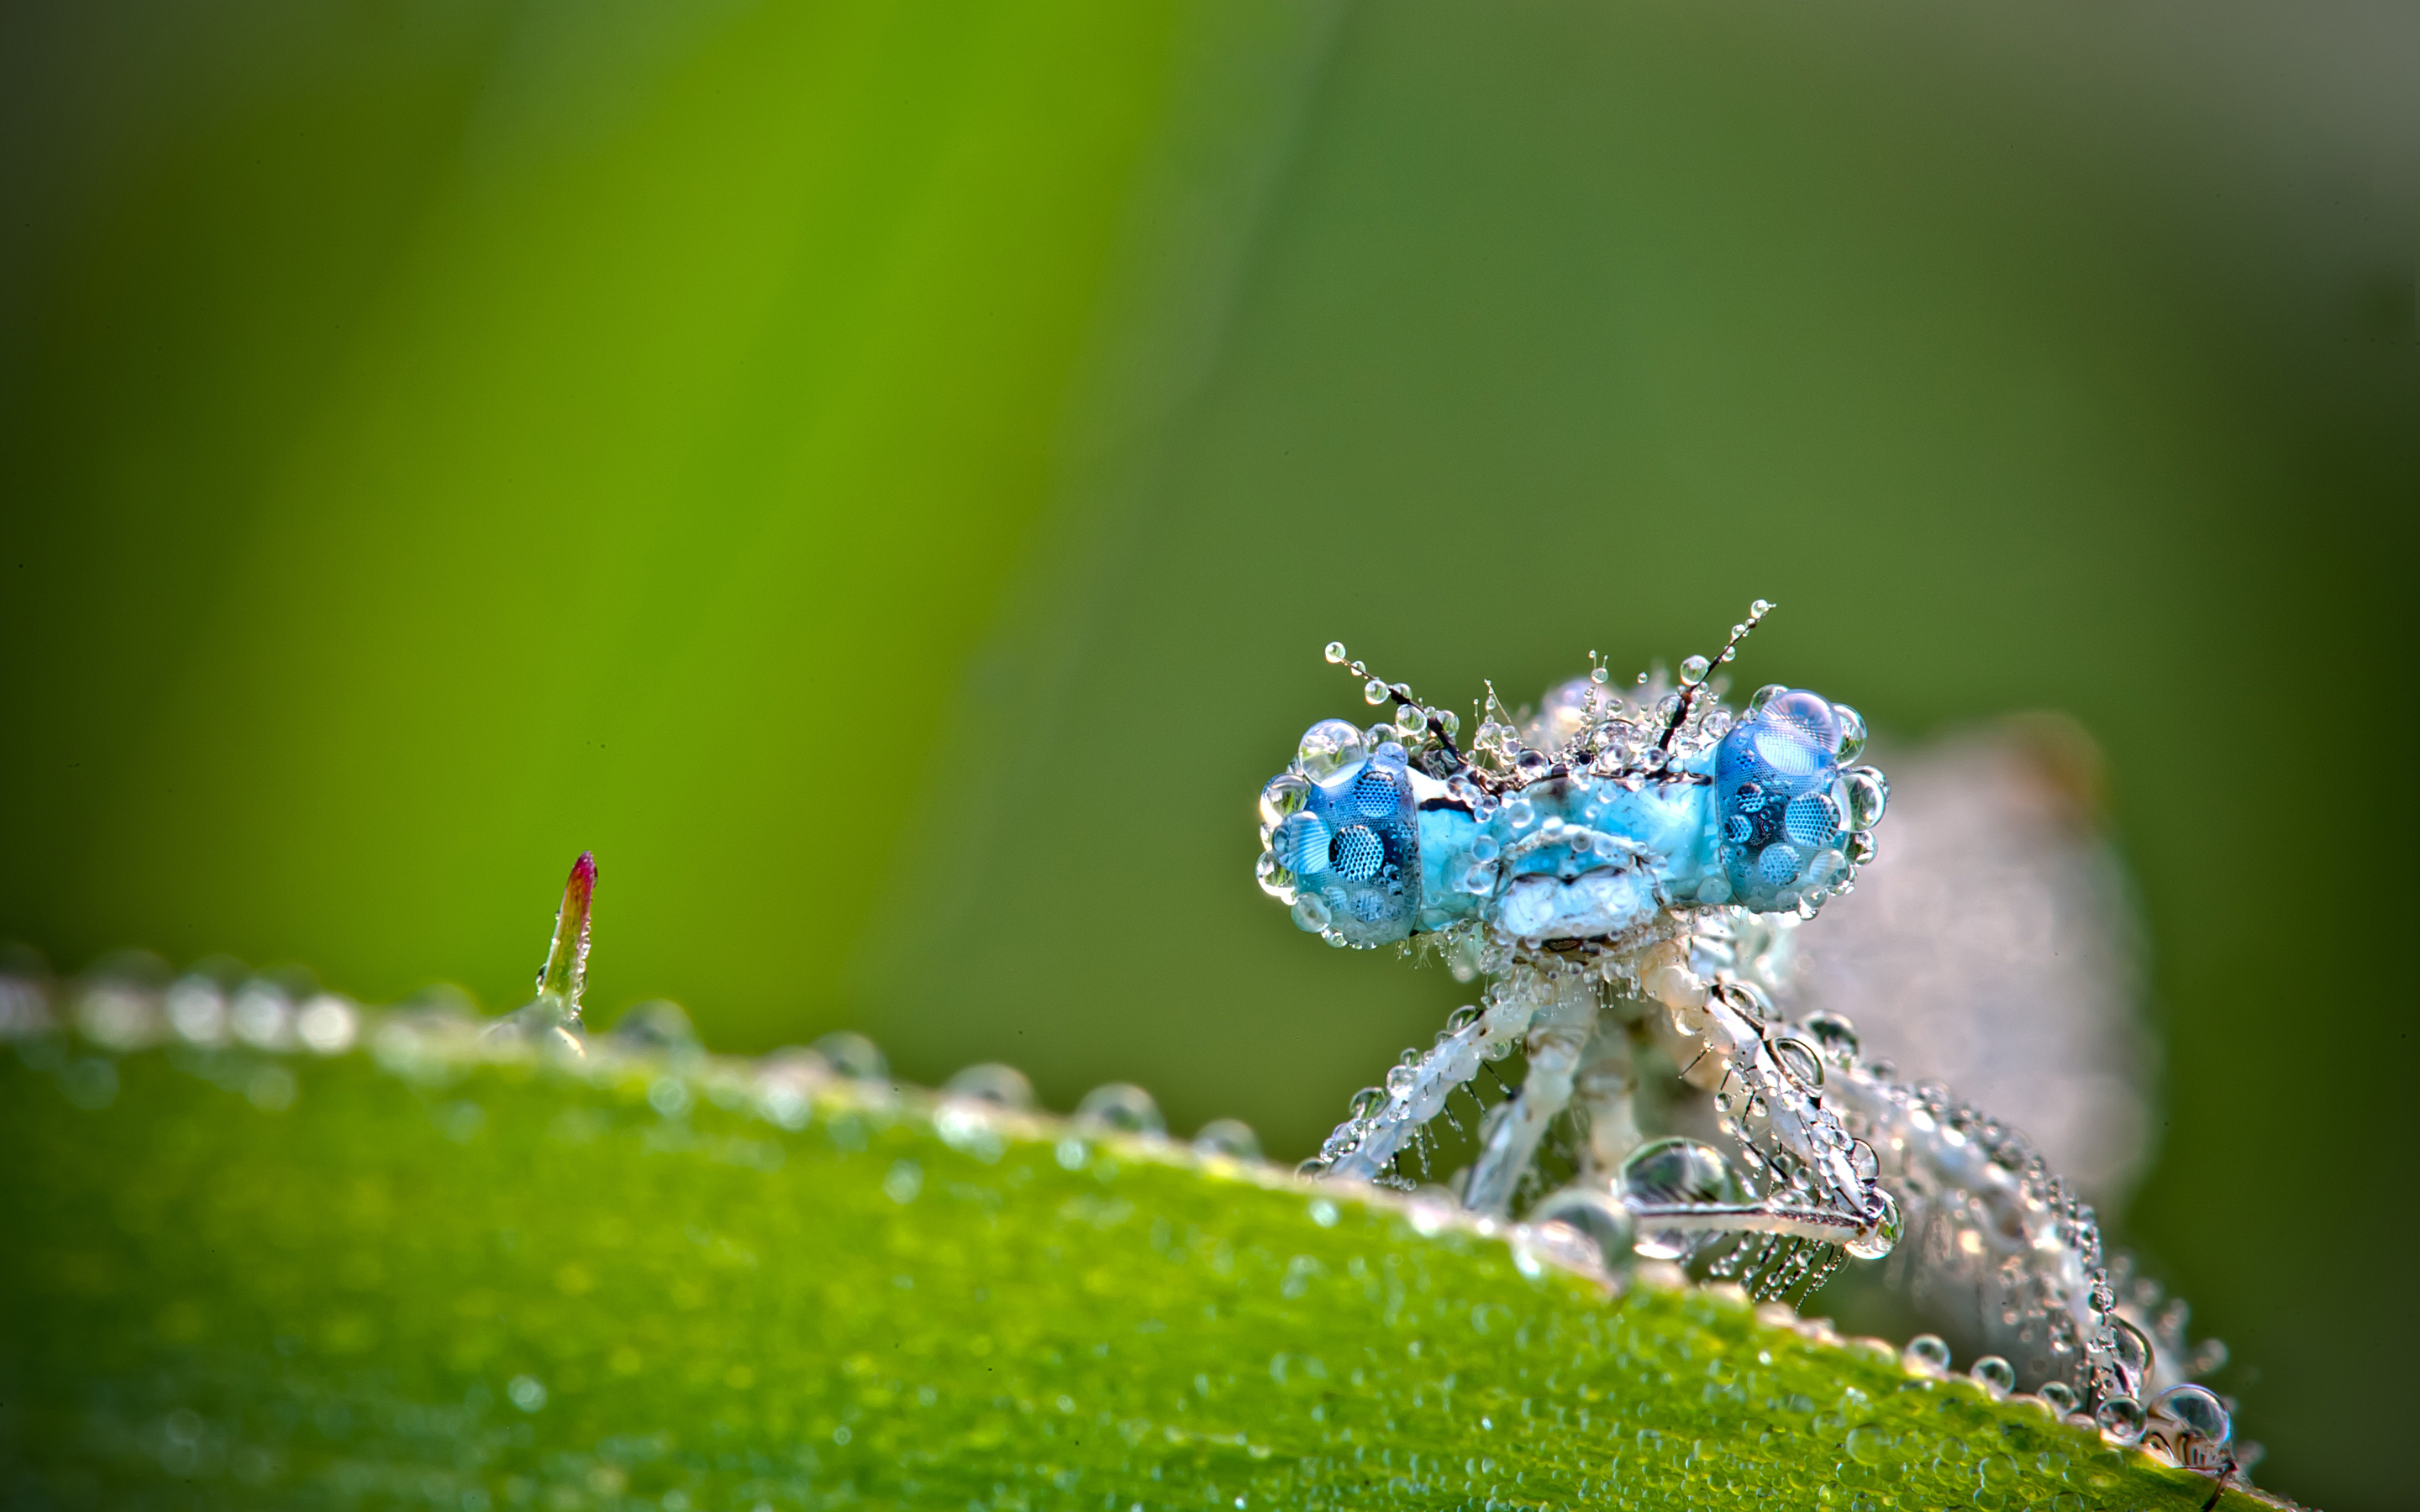 PC Wallpapers animal, insect, close up, dragonfly, green, water drop